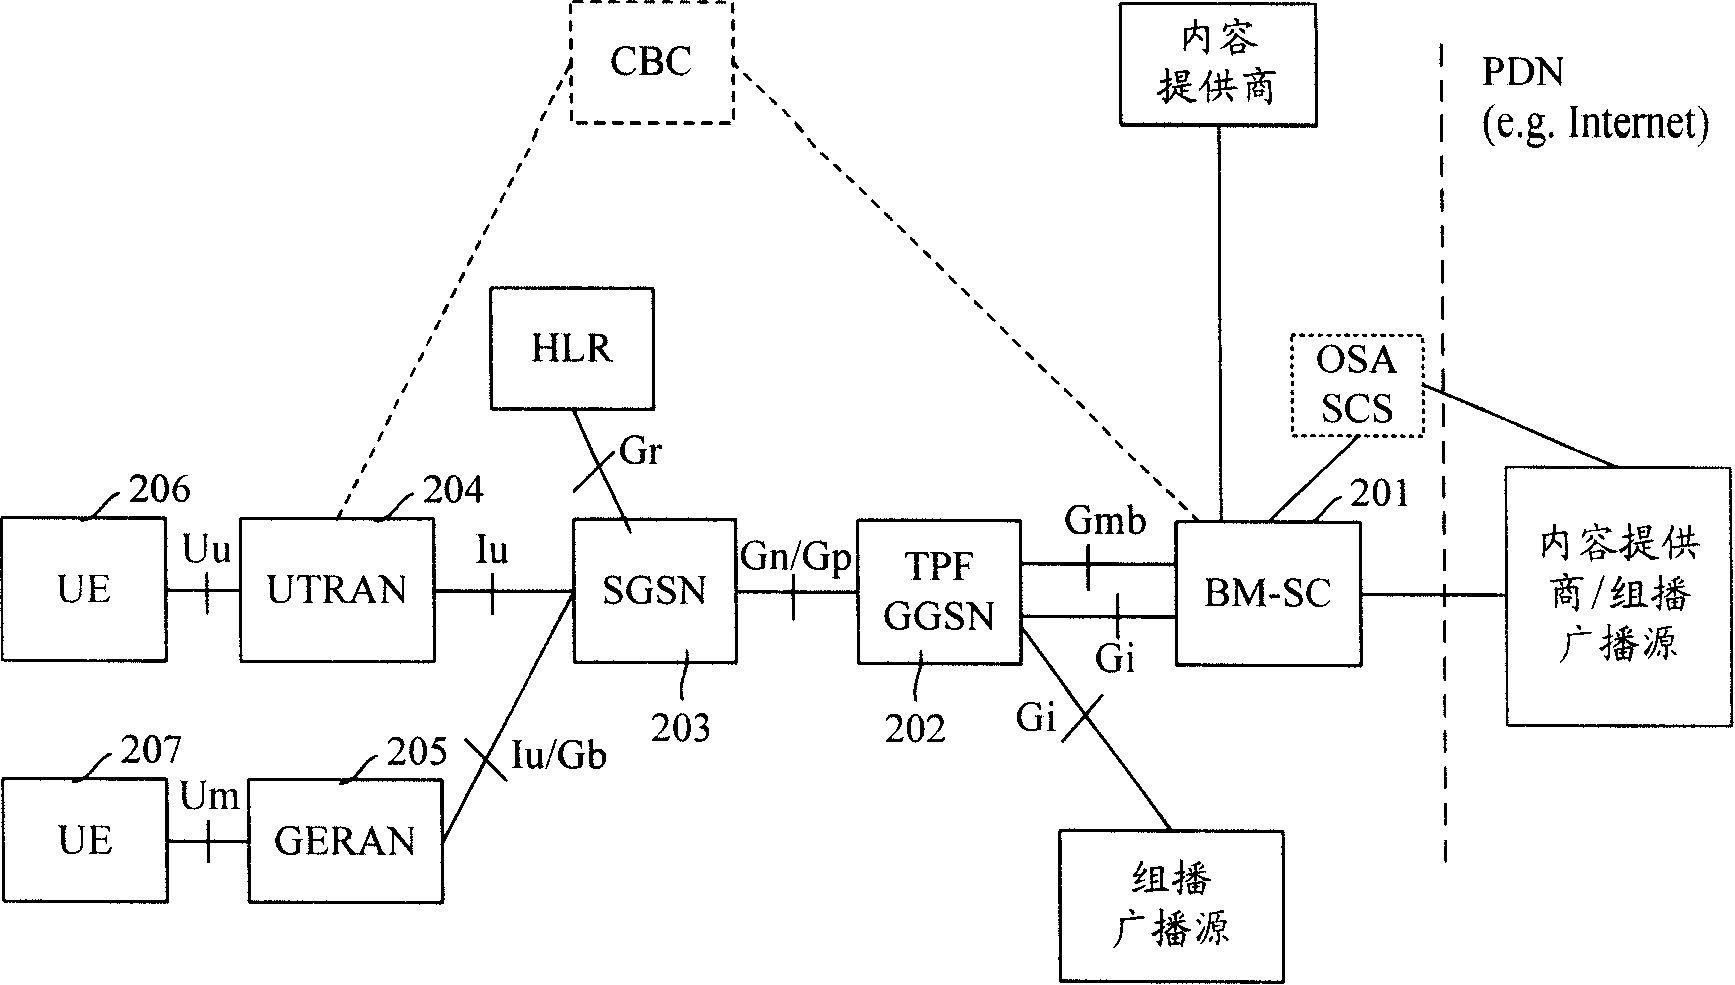 Resource allocation method and system for multimedia broadcasting service in 3G long-term evolution system